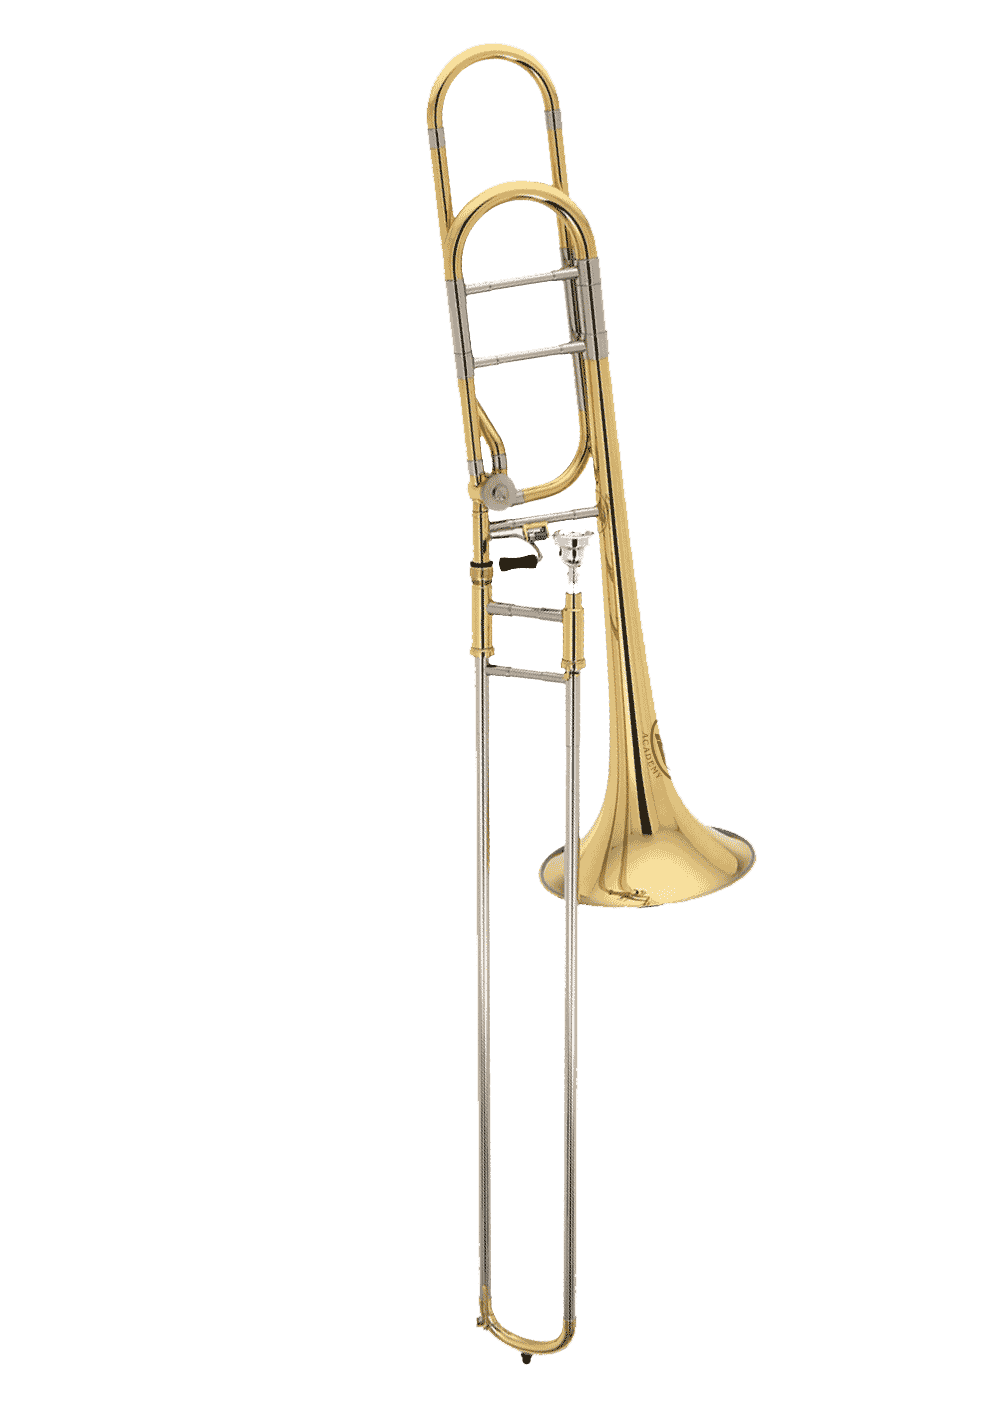 ZO-Adacemy affordable trombone for students